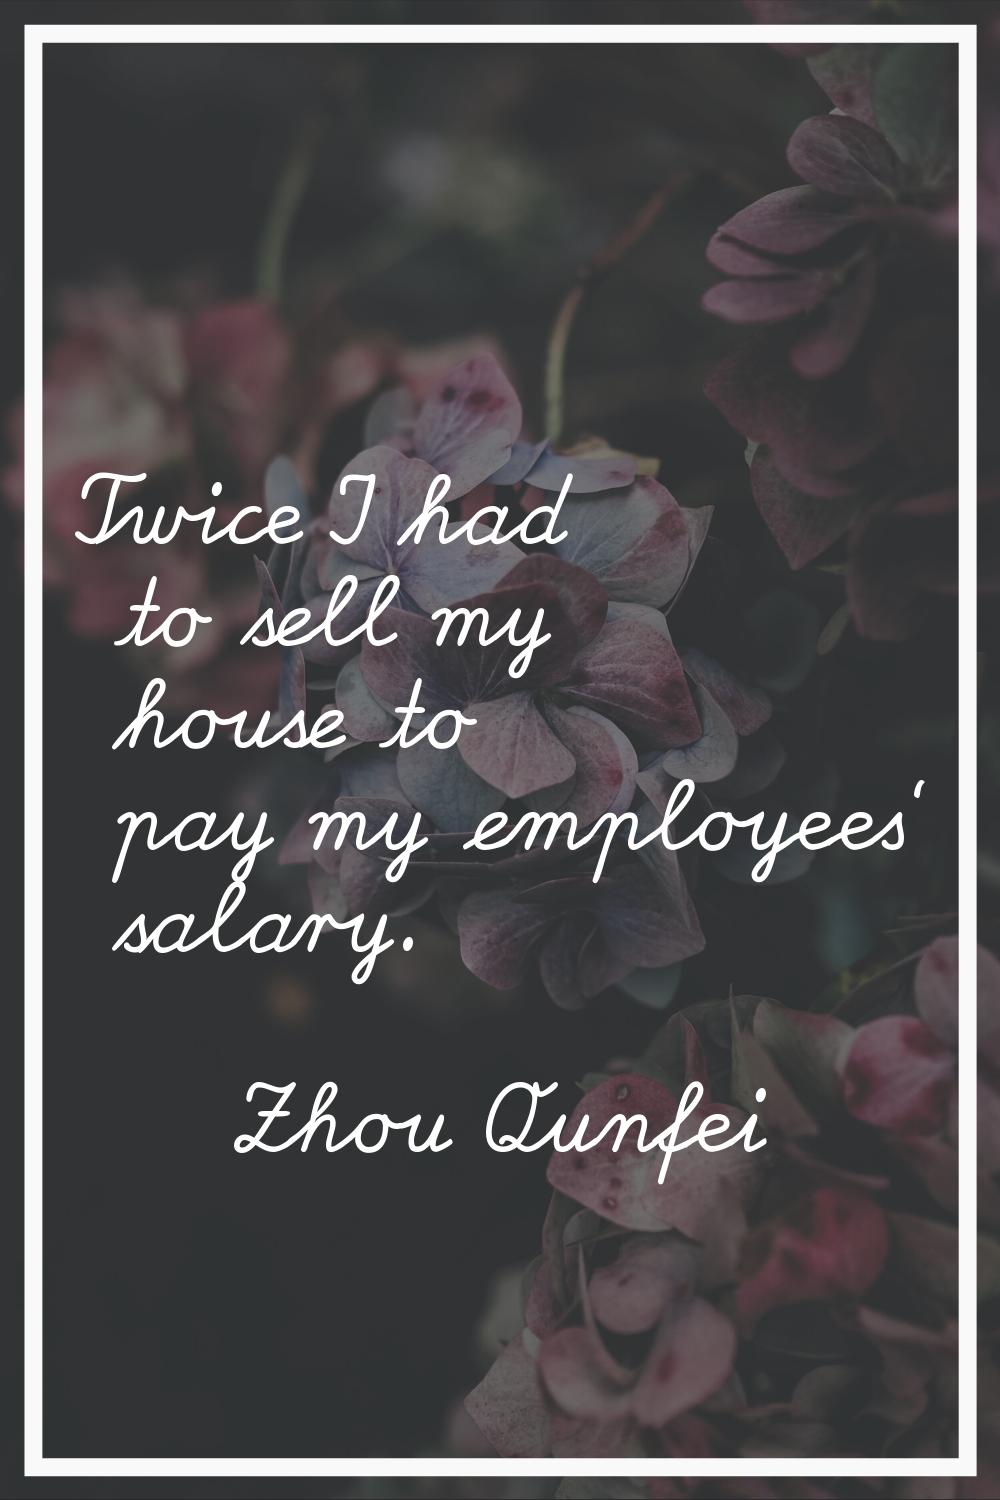 Twice I had to sell my house to pay my employees' salary.